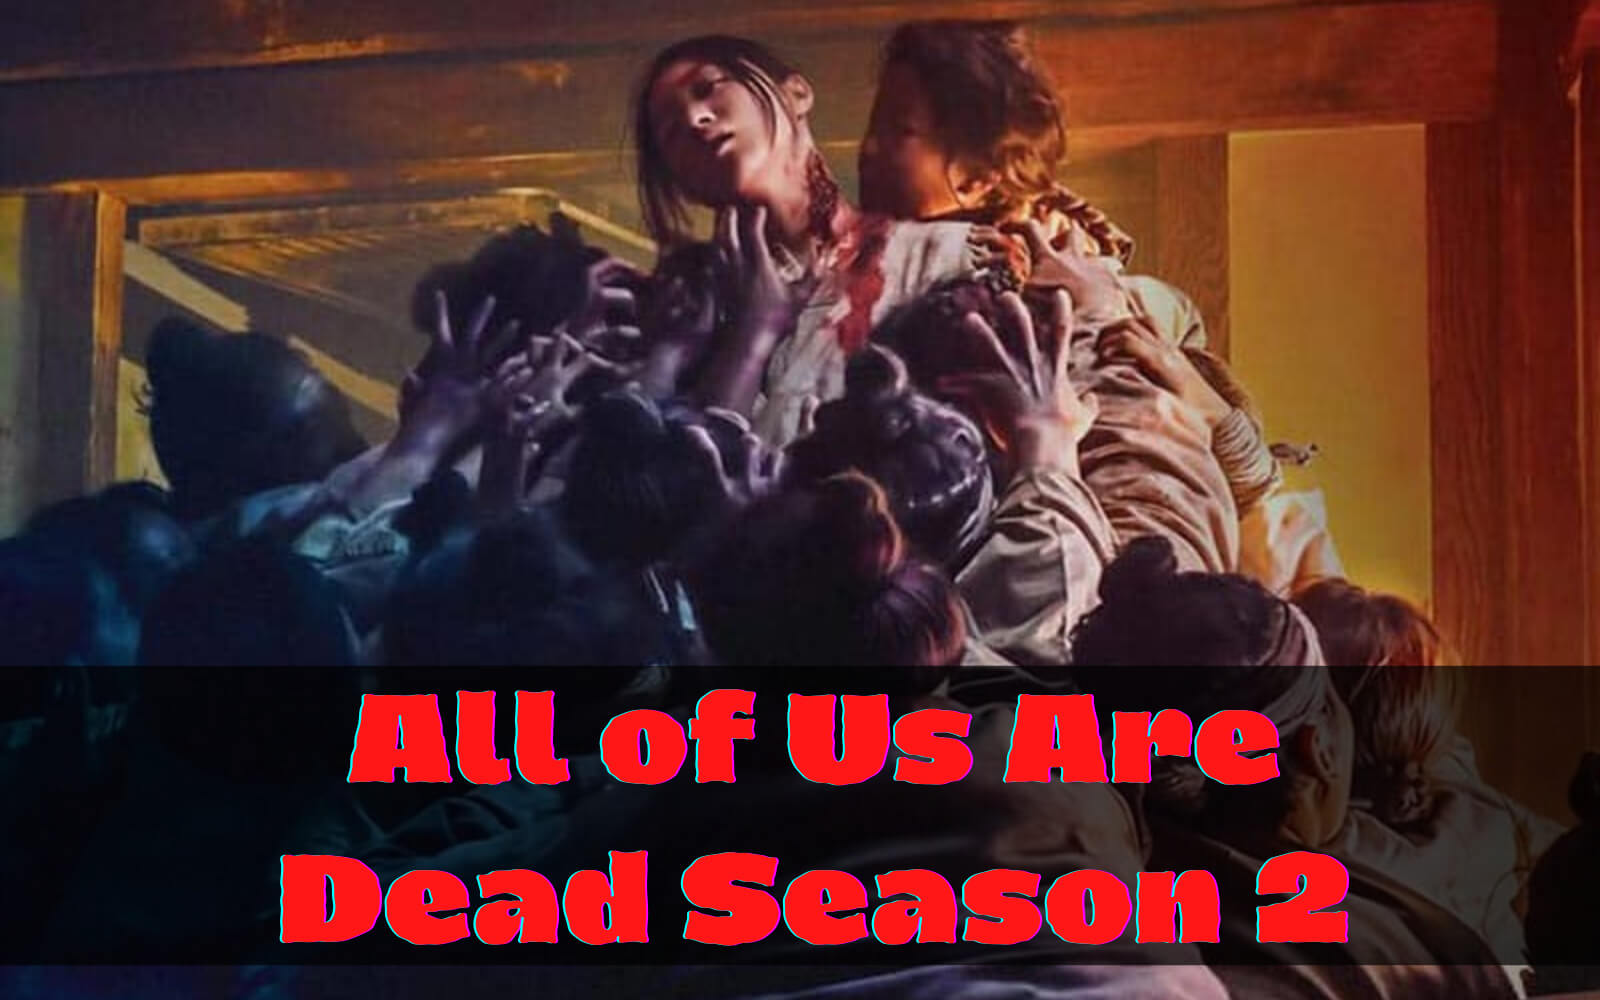 All Of Us Are Dead Season 2 - What We Know So Far